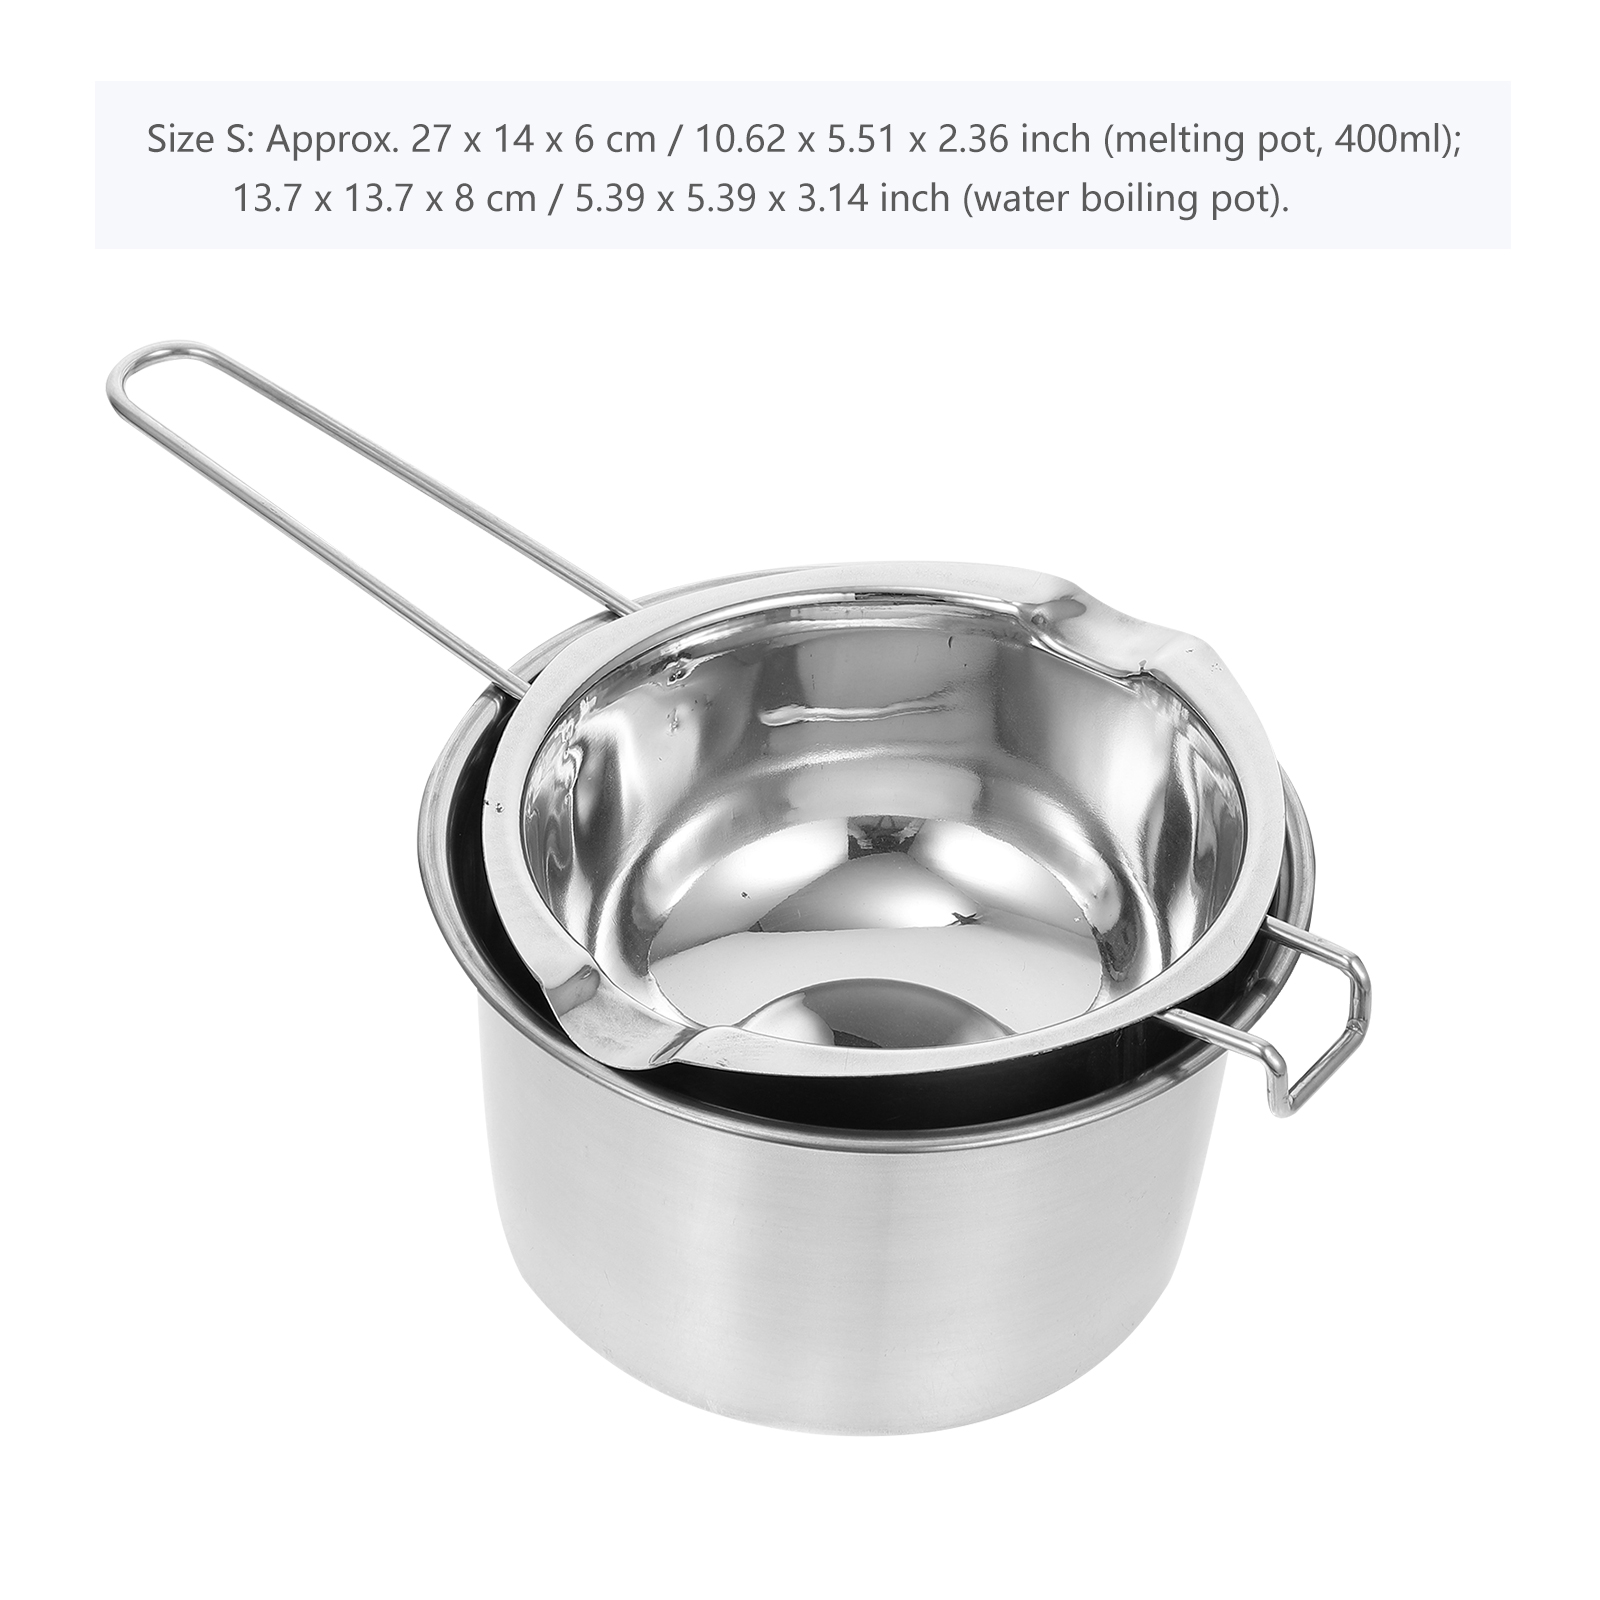 NUOLUX 1 Set Double Boiler Pot Stainless Steel Chocolate Pot Chocolate Melting Pot - image 4 of 6